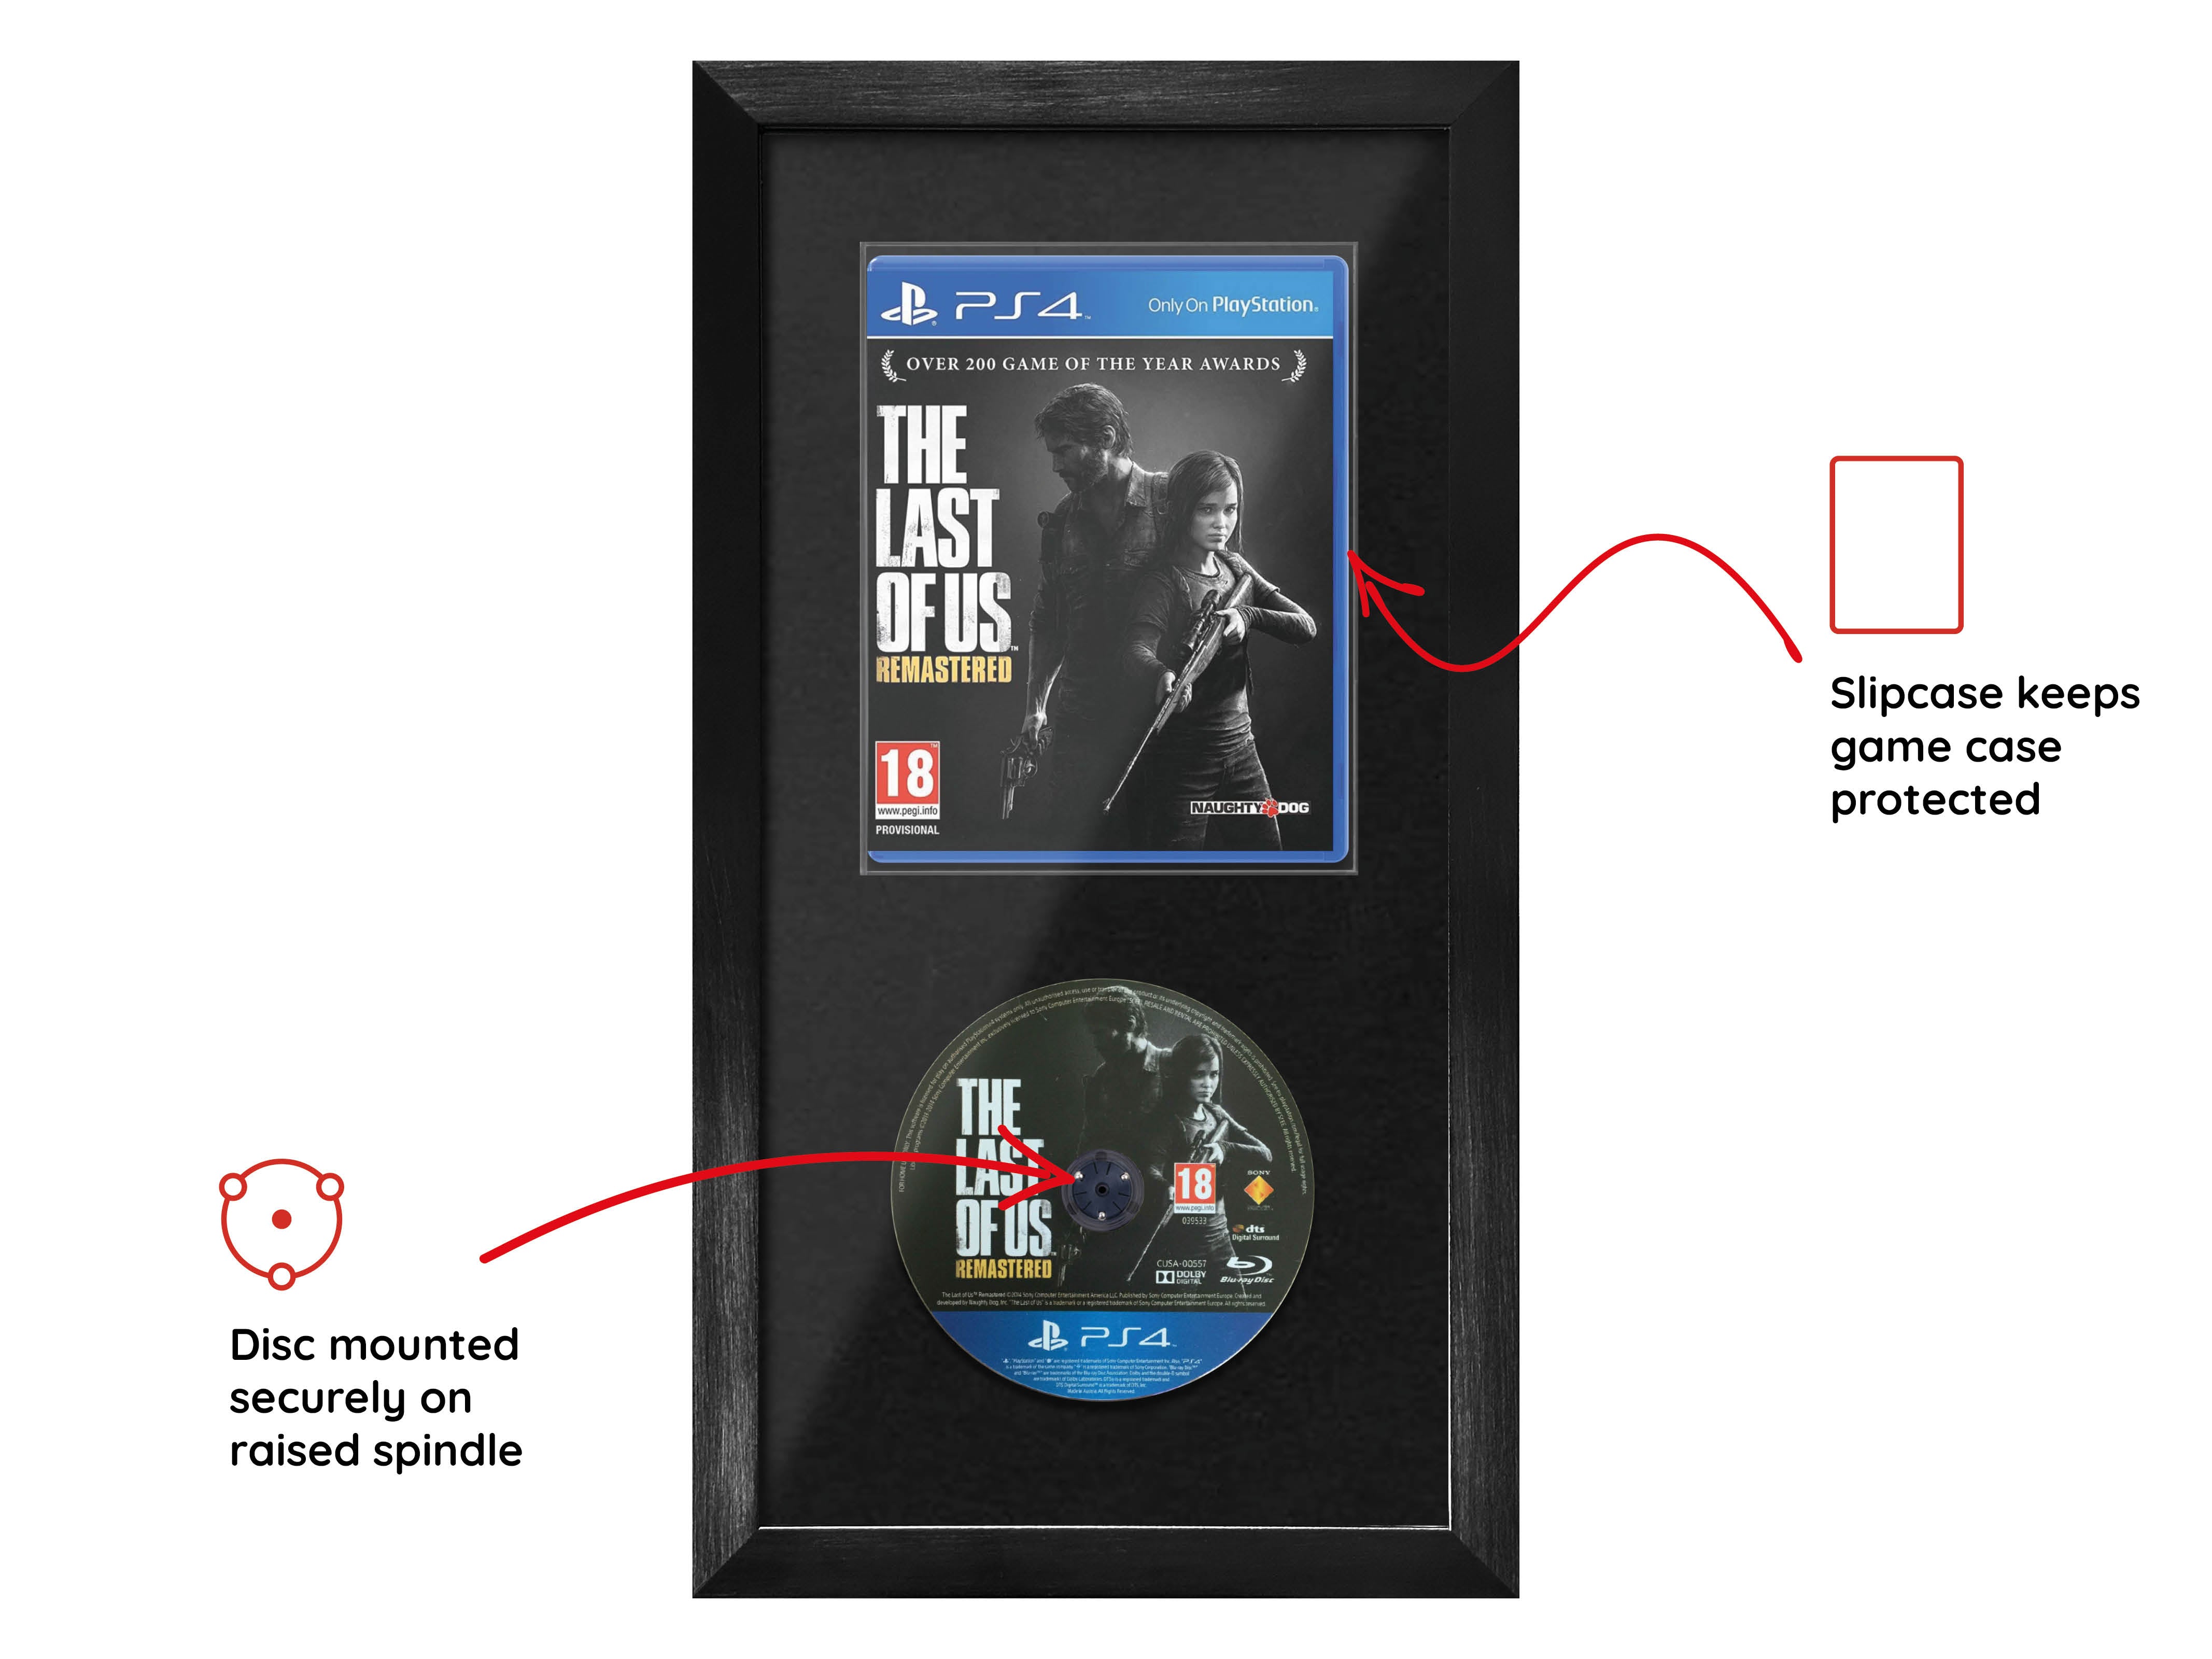 The Last of Us: Remastered (PS4) Expo Range Framed Game